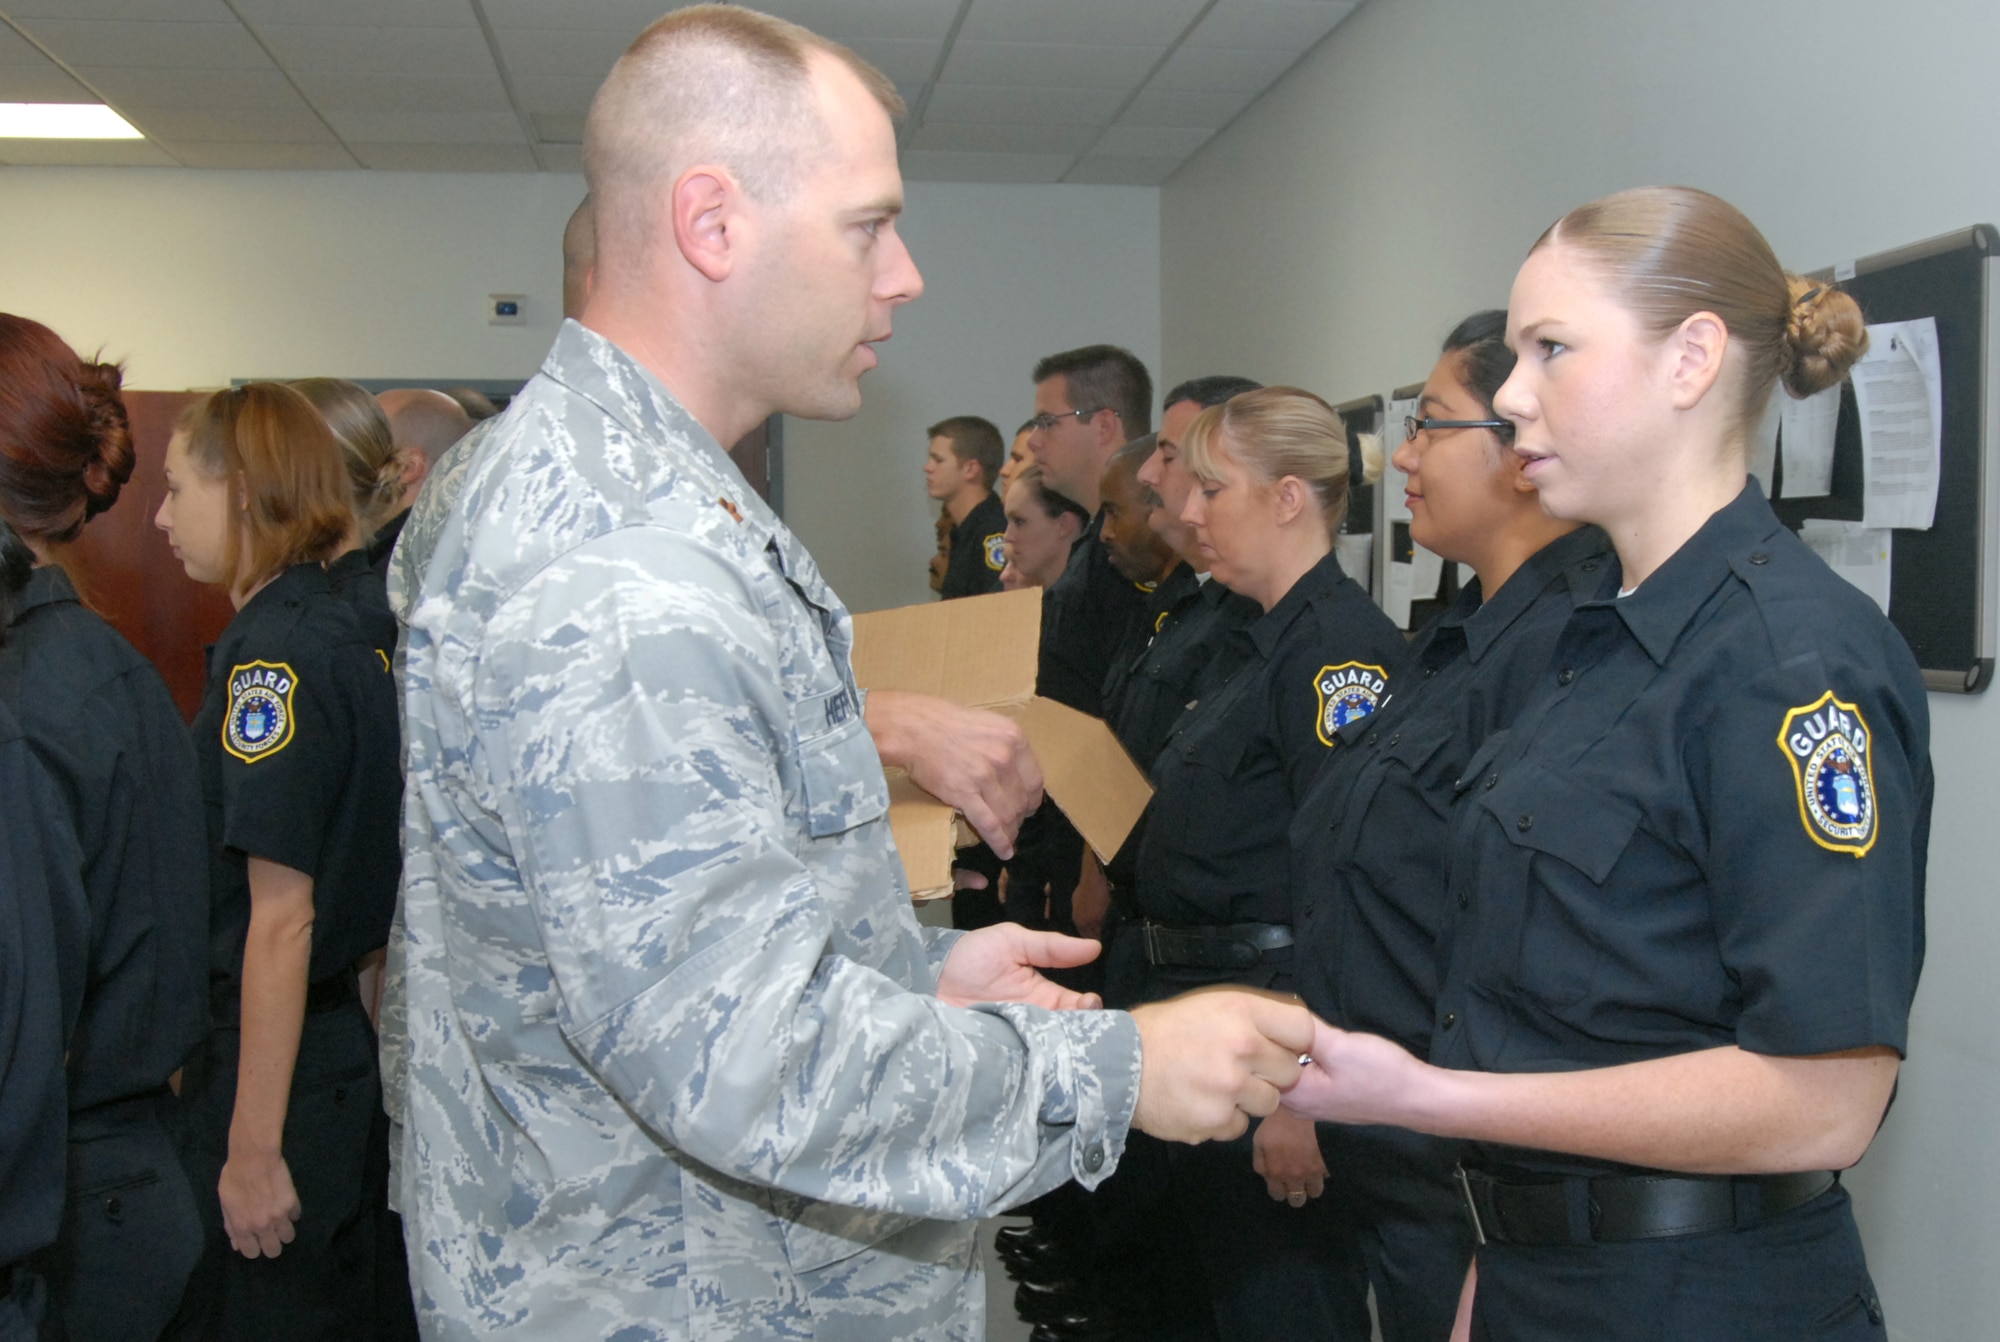 Maj. Steven Heffington, 95th Security Forces Squadron commander, gives a police badge to Andrea Vermillion, civilian security guard, during a ceremony at the 95th SFS headquarters Oct. 9. (Air Force photo by Senior Airman Julius Delos Reyes)